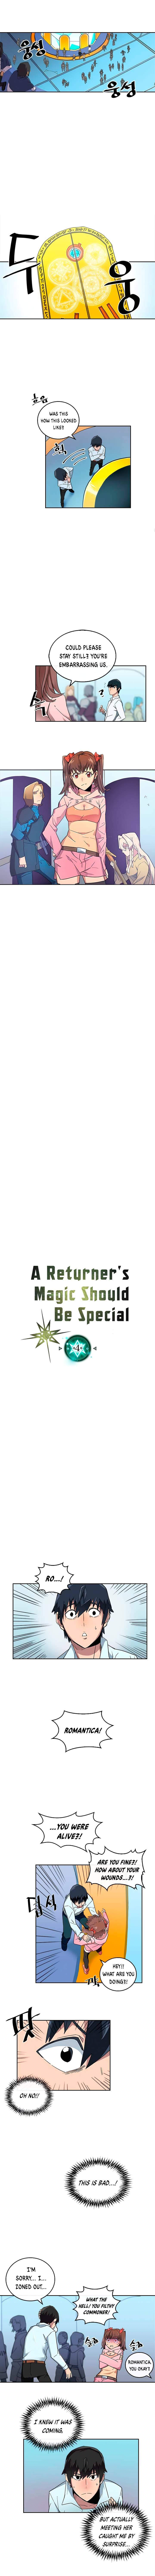 A Returner's Magic Should Be Special - Chapter 4 Page 2